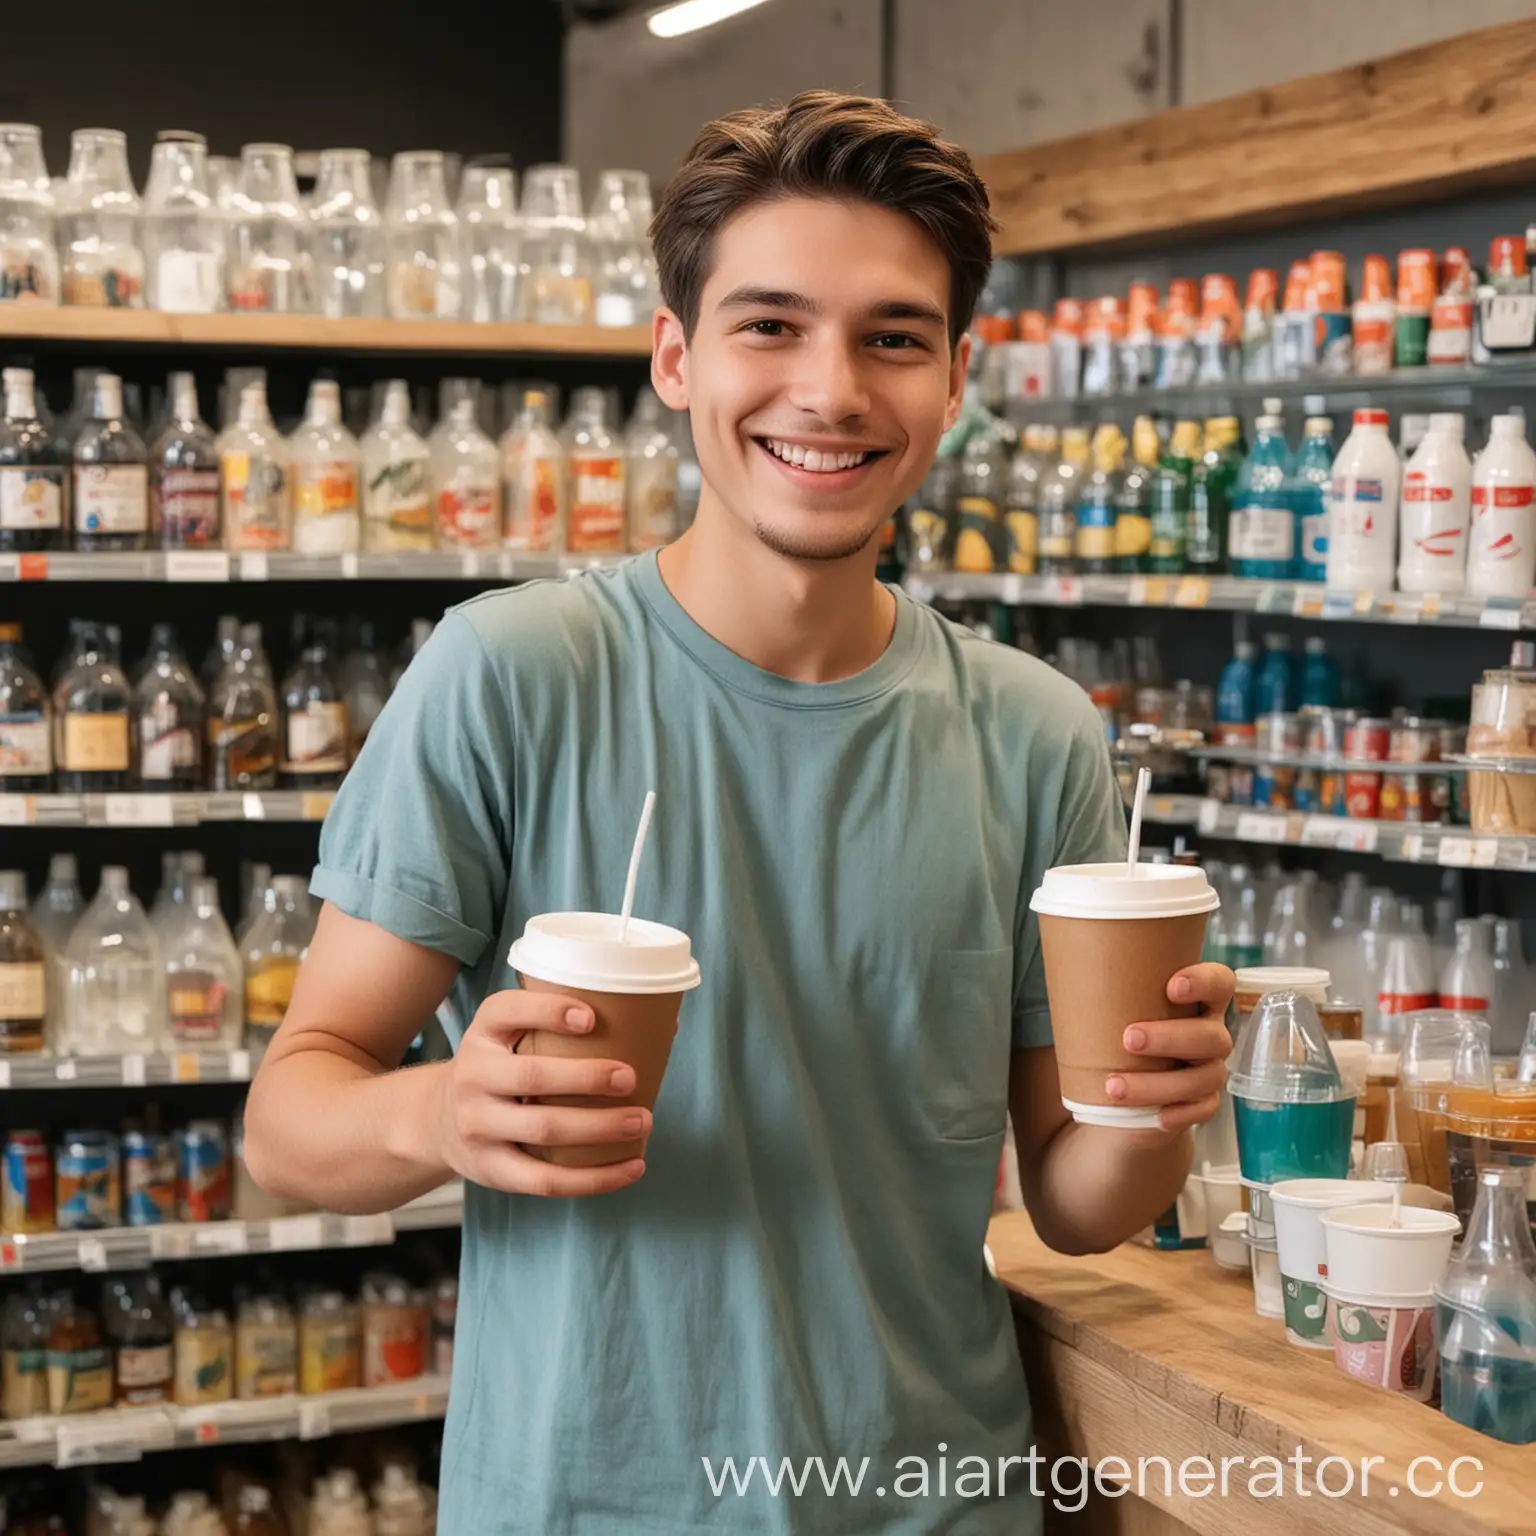 Smiling-Young-Man-Selling-Drinks-with-Disposable-Cup-in-Store